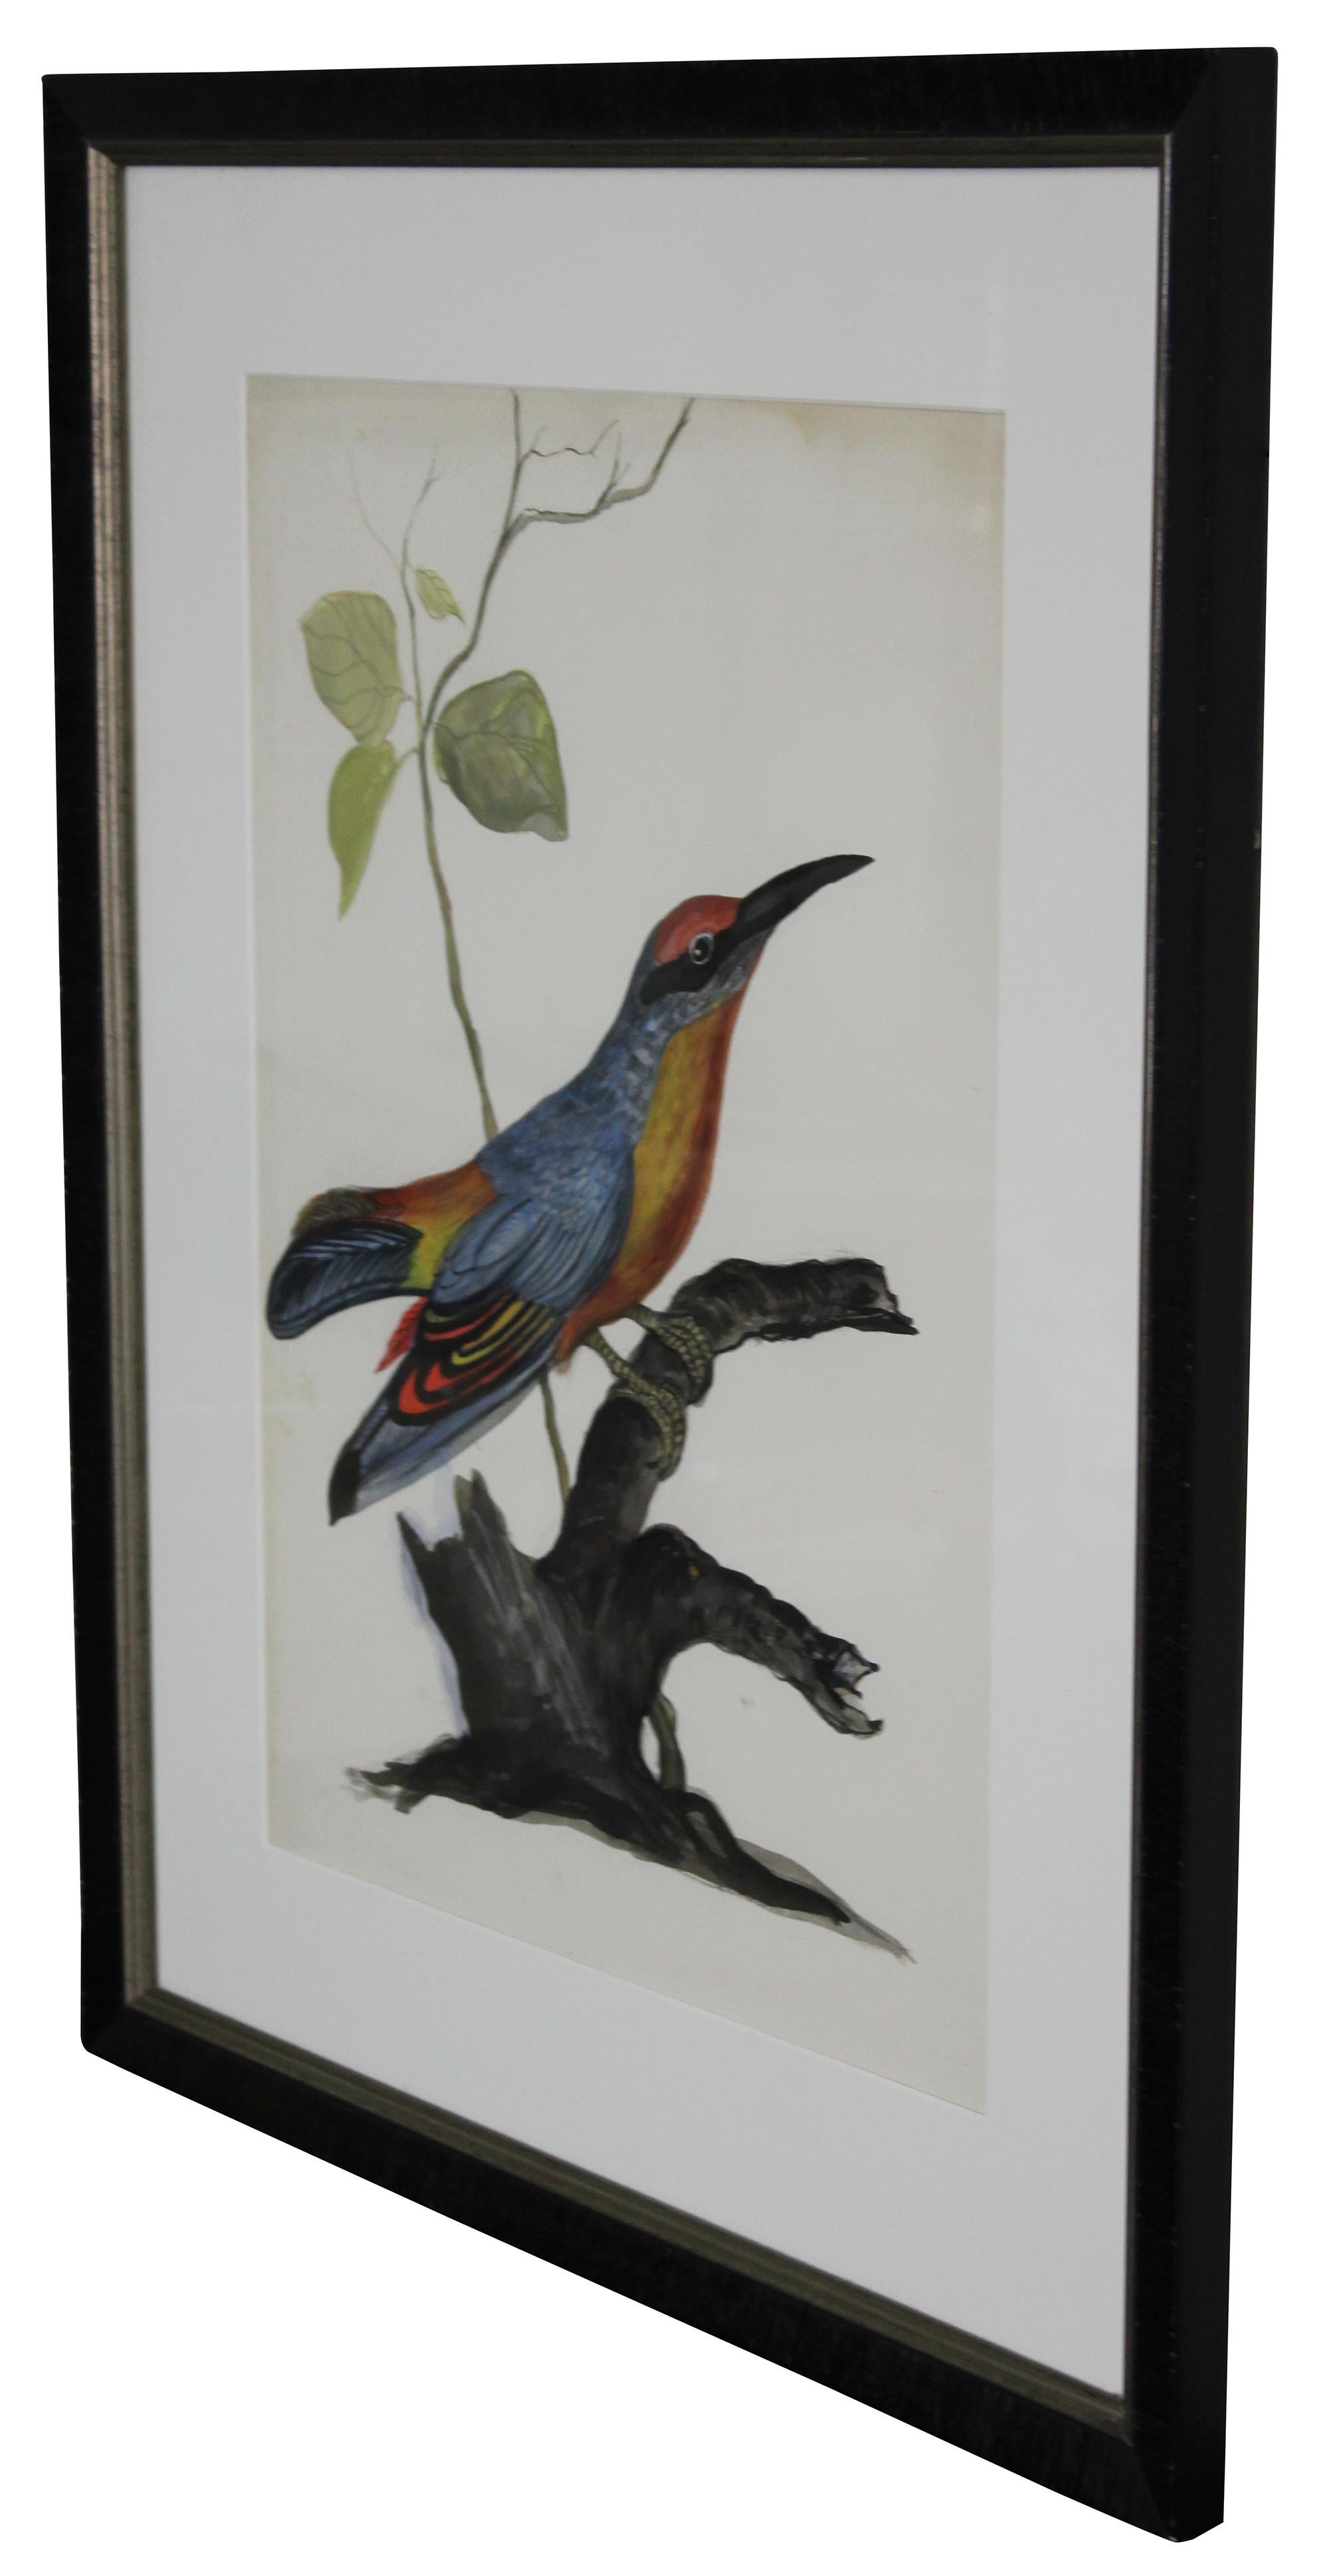 Vintage watercolor painting of a bird perched on a branch or tree root.

Measures: Sans frame 19